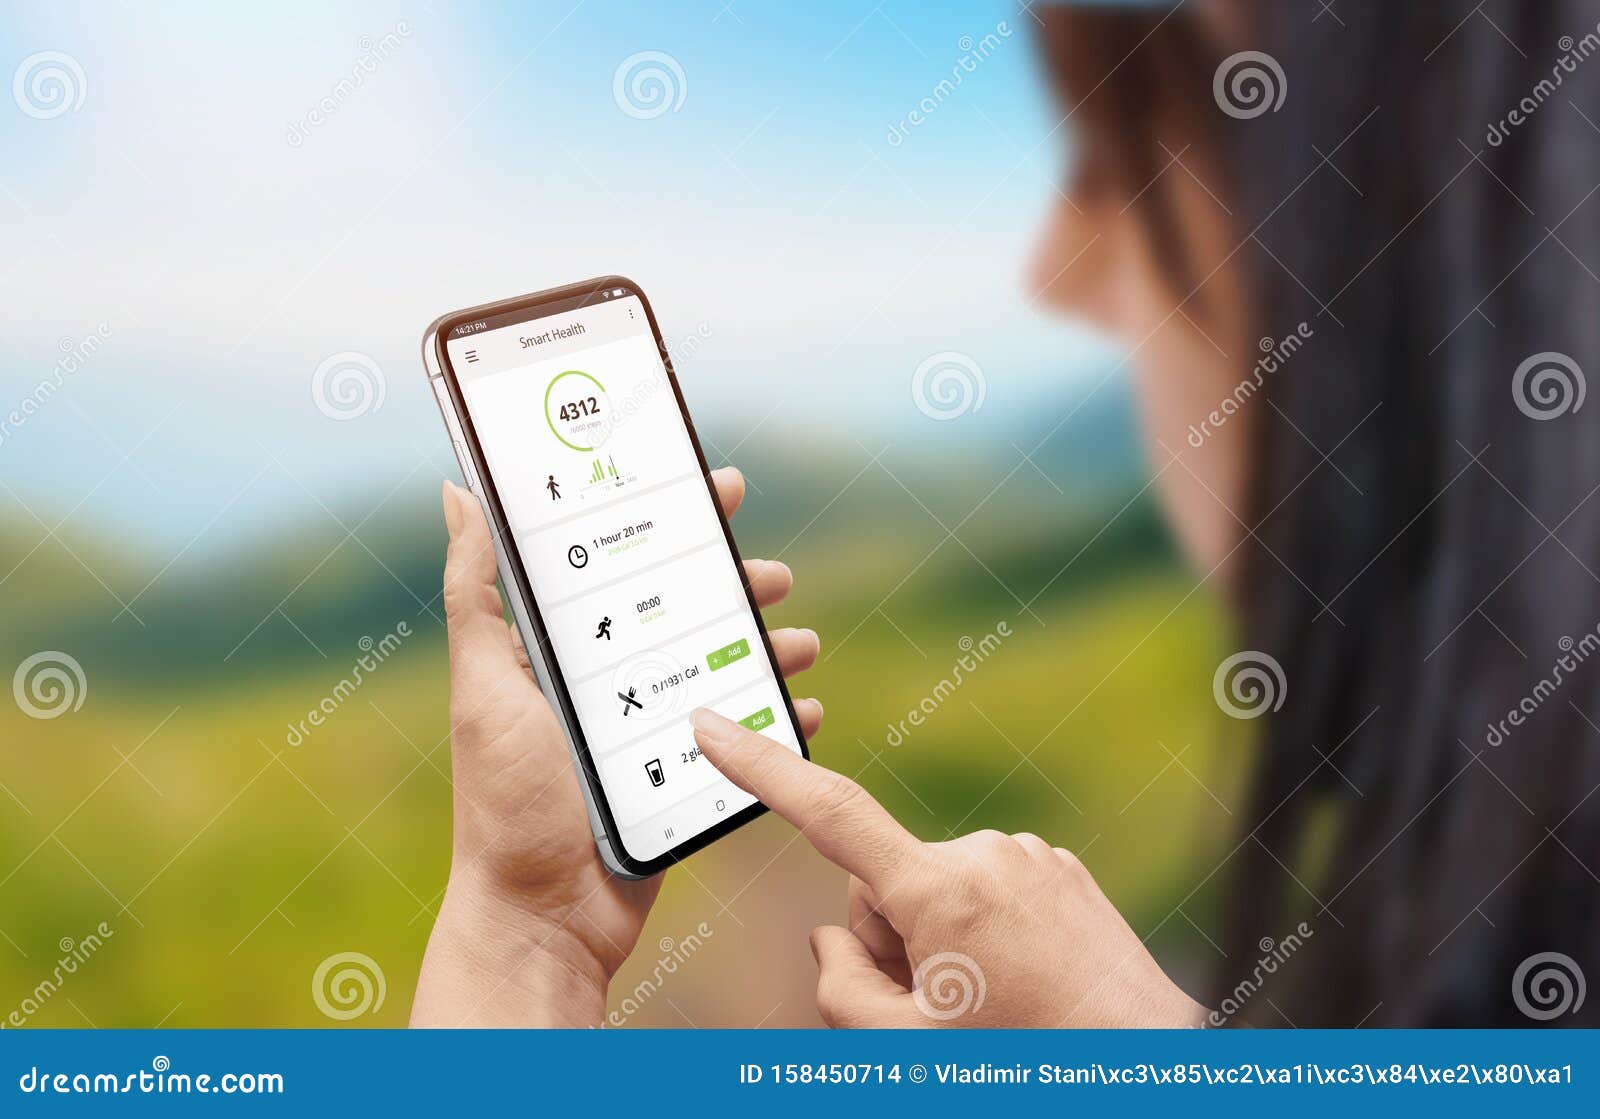 smart health app on mobile phone in woman hand